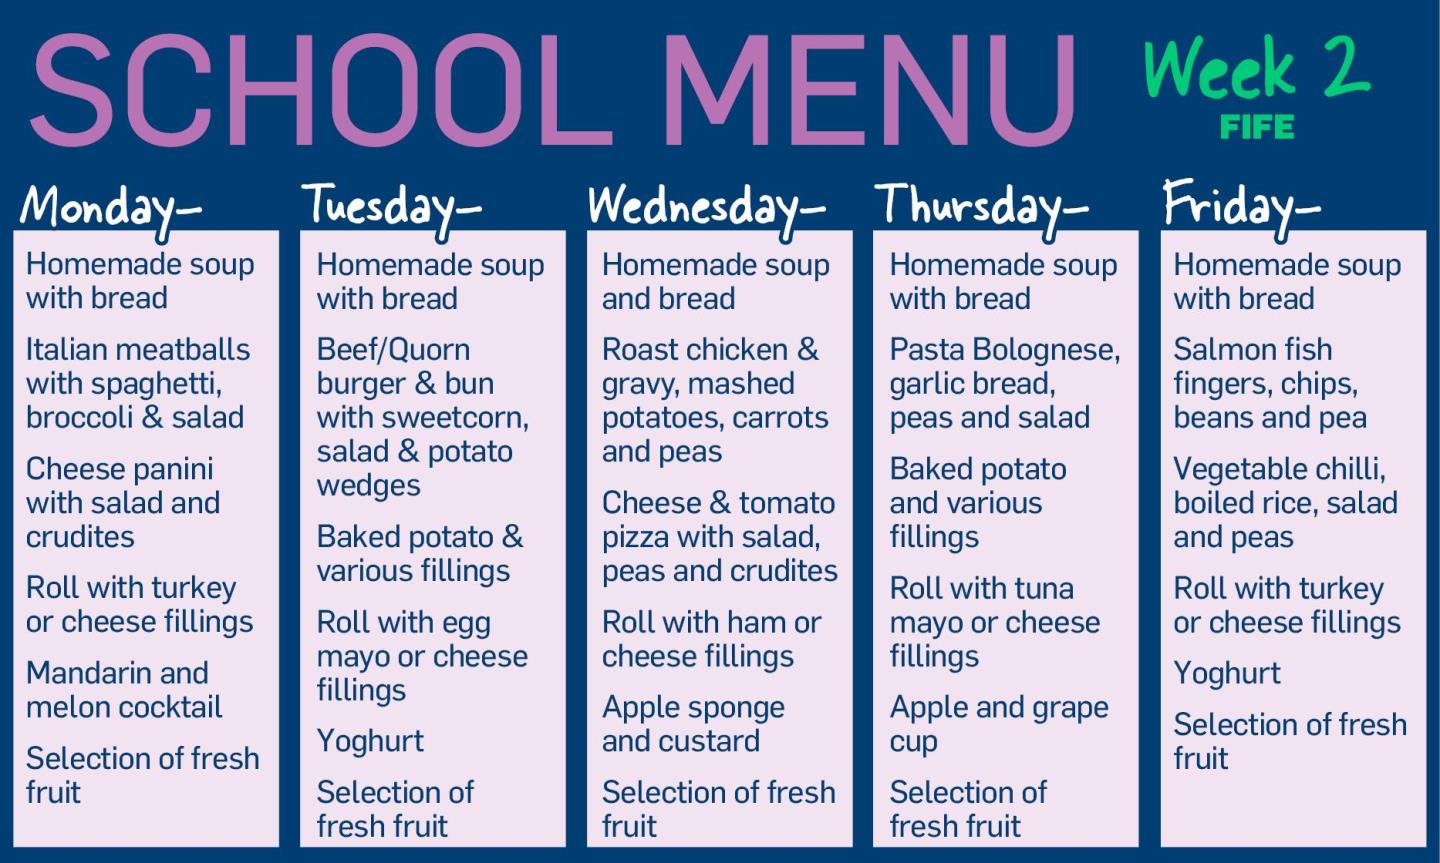 Primary school meals menus for Angus, Dundee, Fife, Perth and Kinross